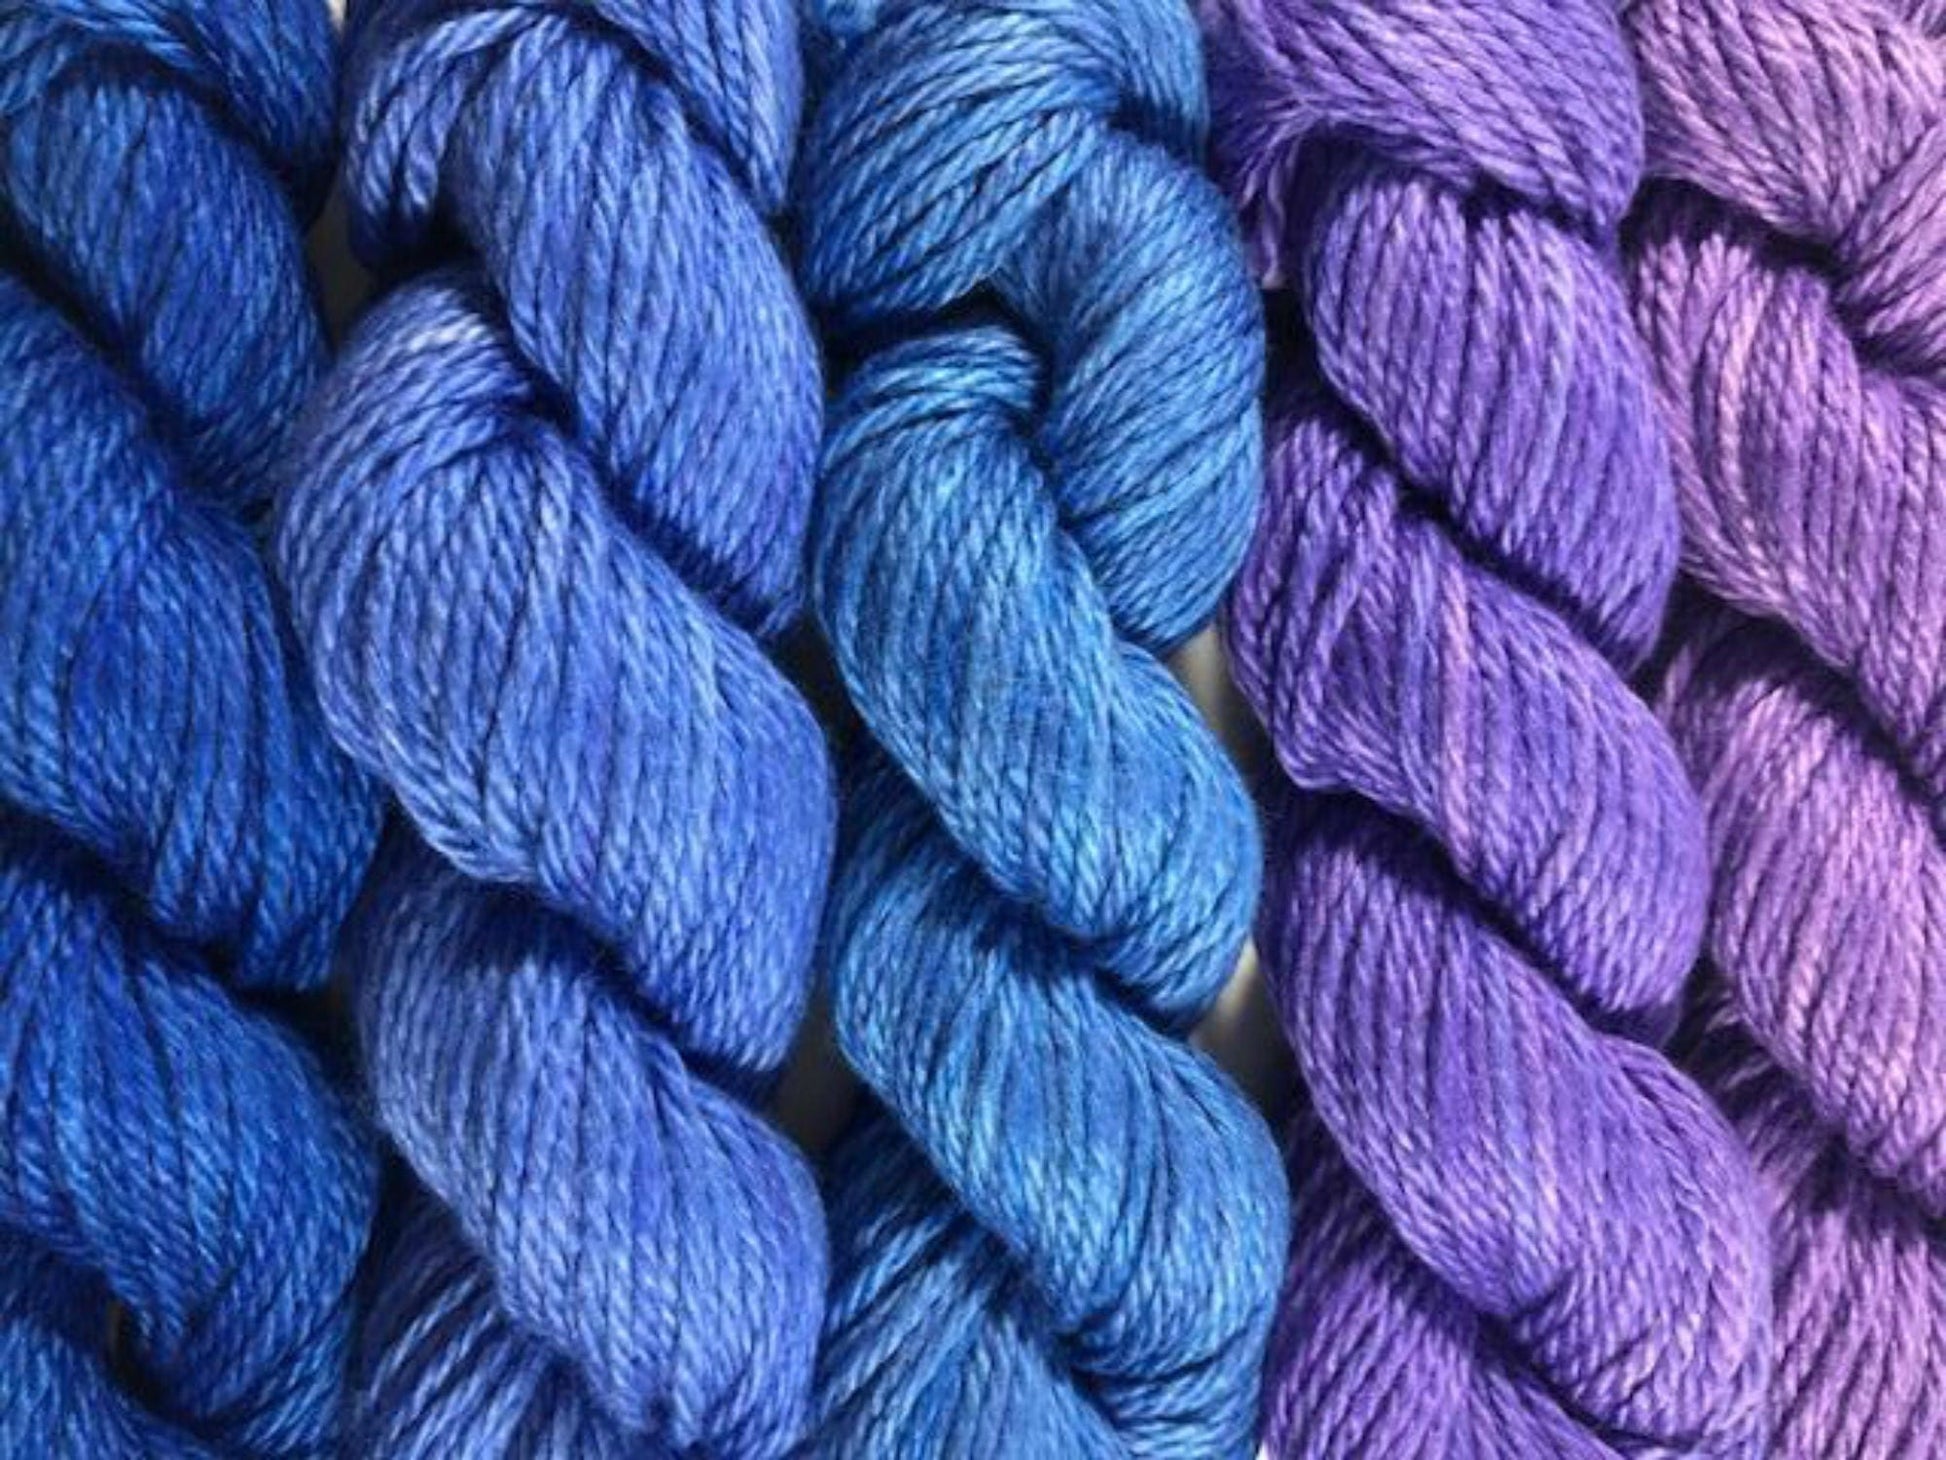 Indie Dyed Yarn Kit - Blue to Purple Gradient - Plant Based - Hand Dyed - Semi Solids - Bamboo Cotton - DK Light Worsted 3 Ply - Vegan